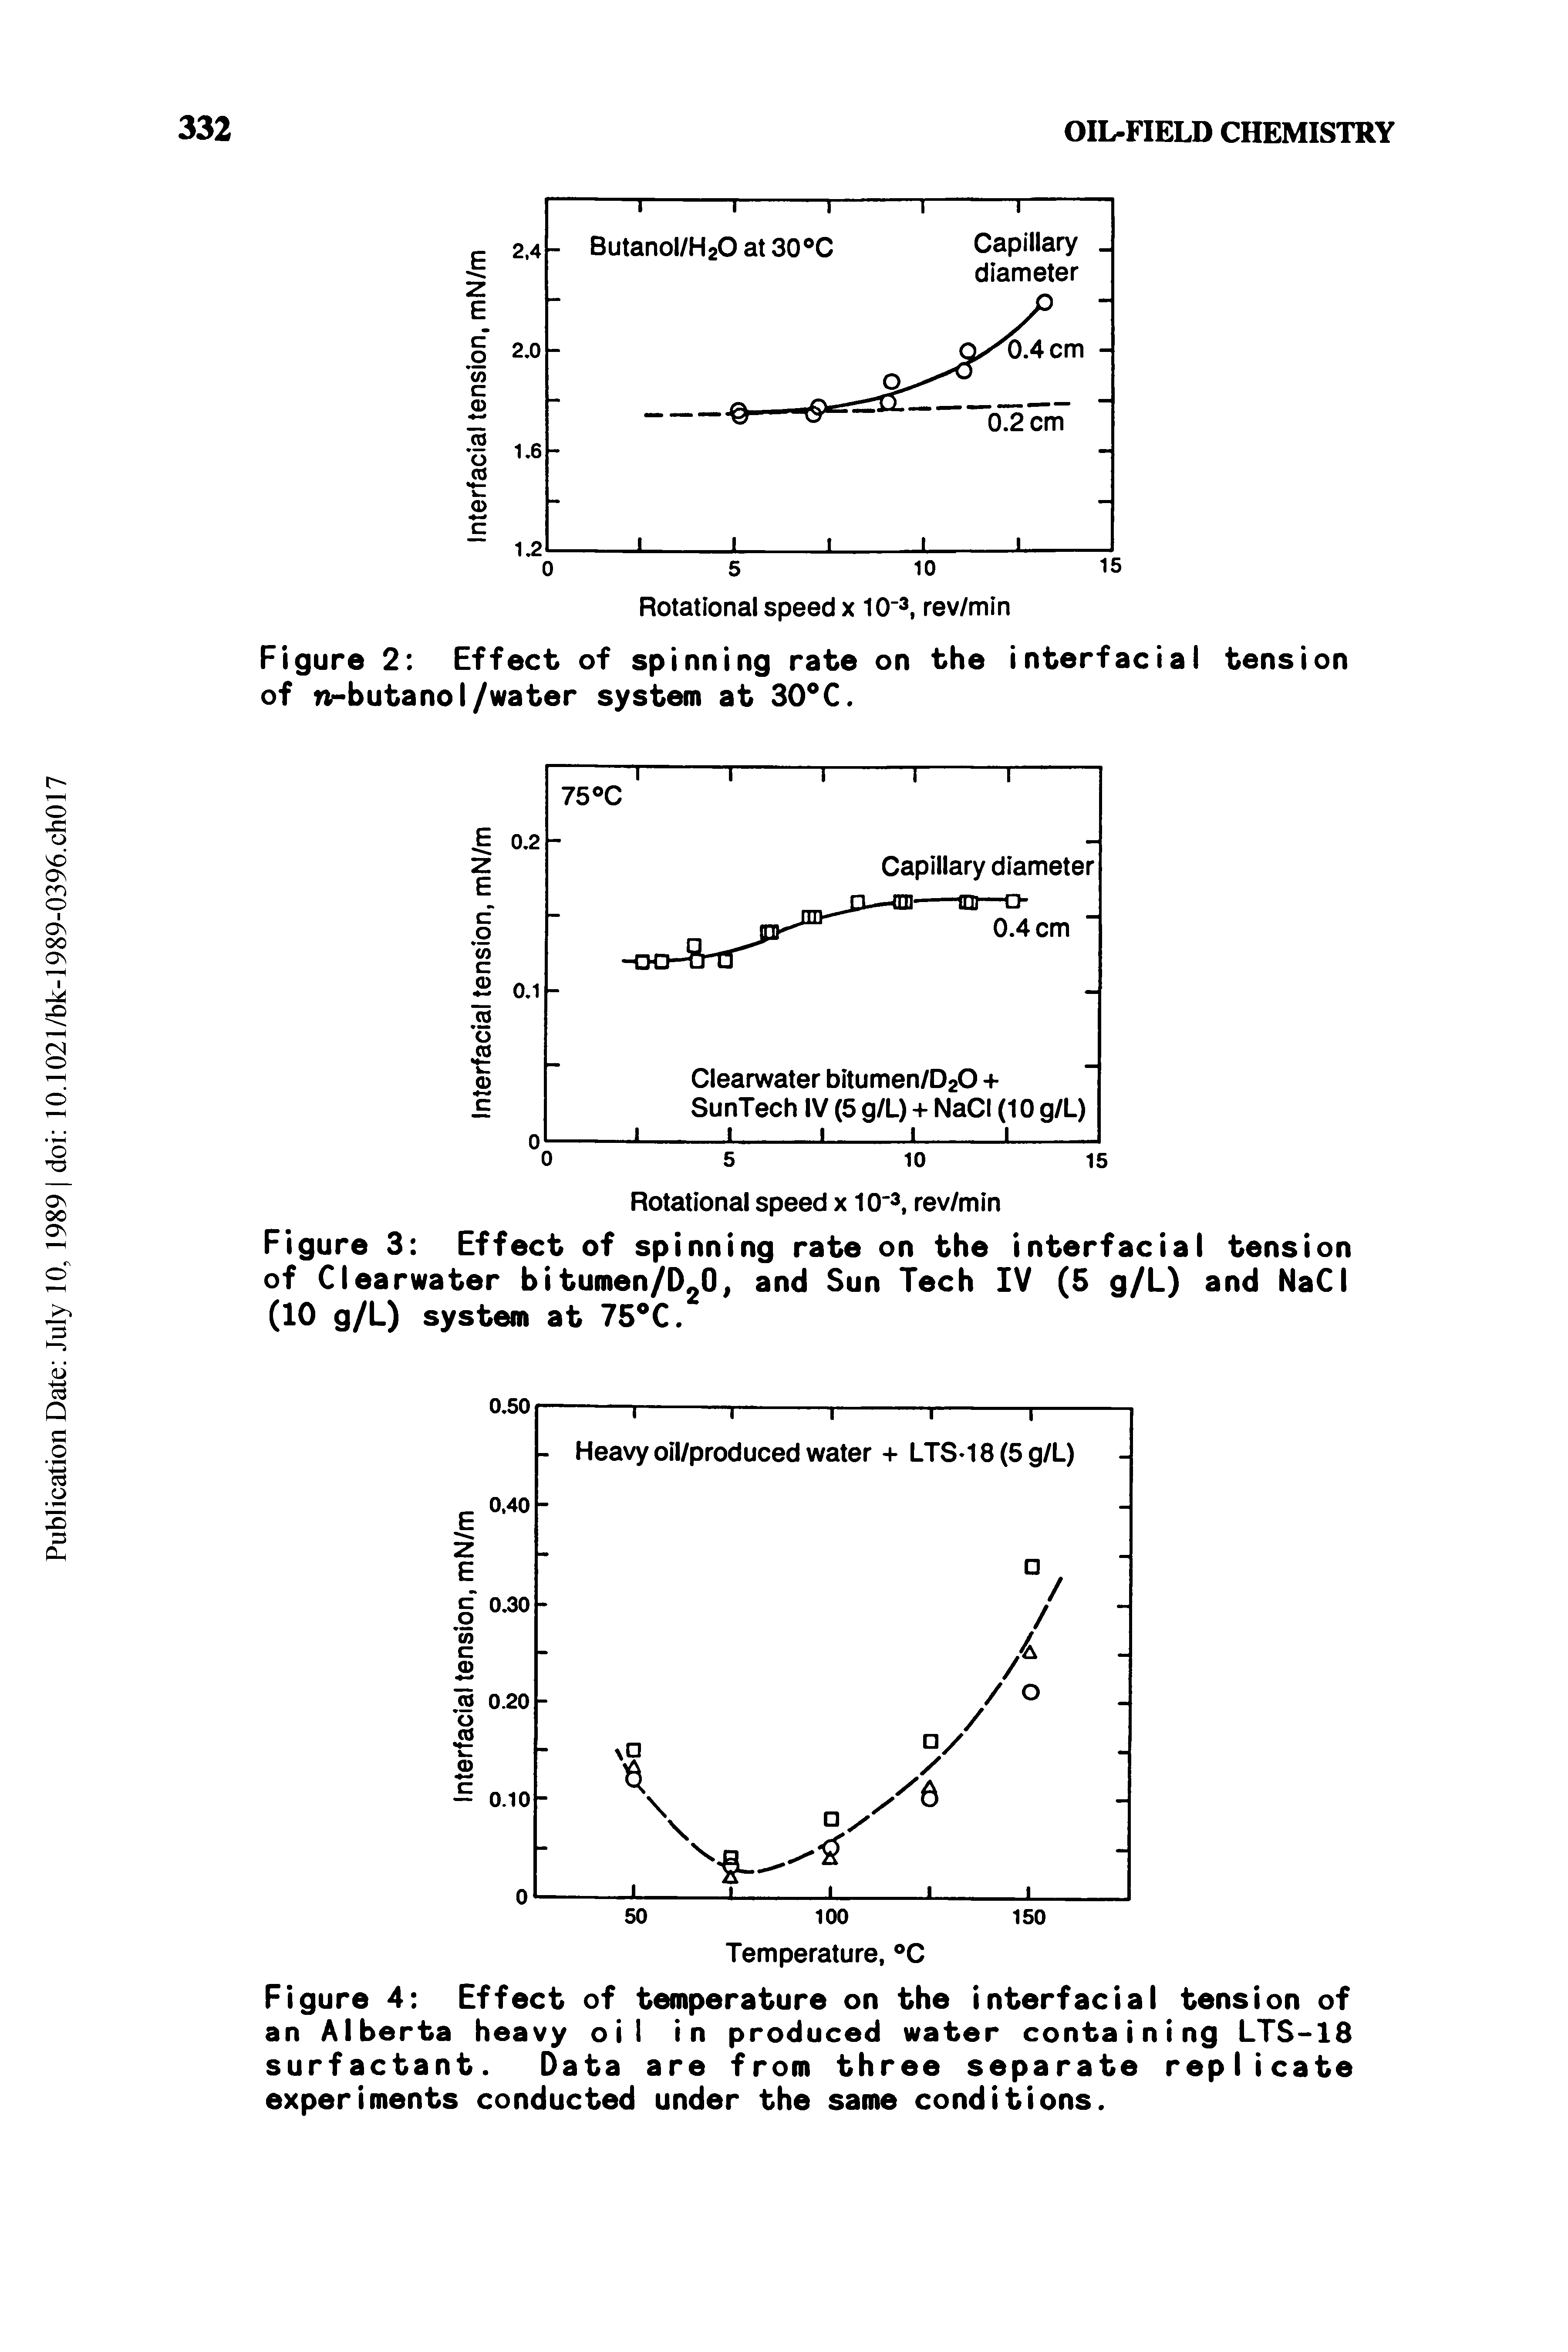 Figure 2 Effect of spinning rate on the interfacial tension of r -butanol/water system at 30°C.